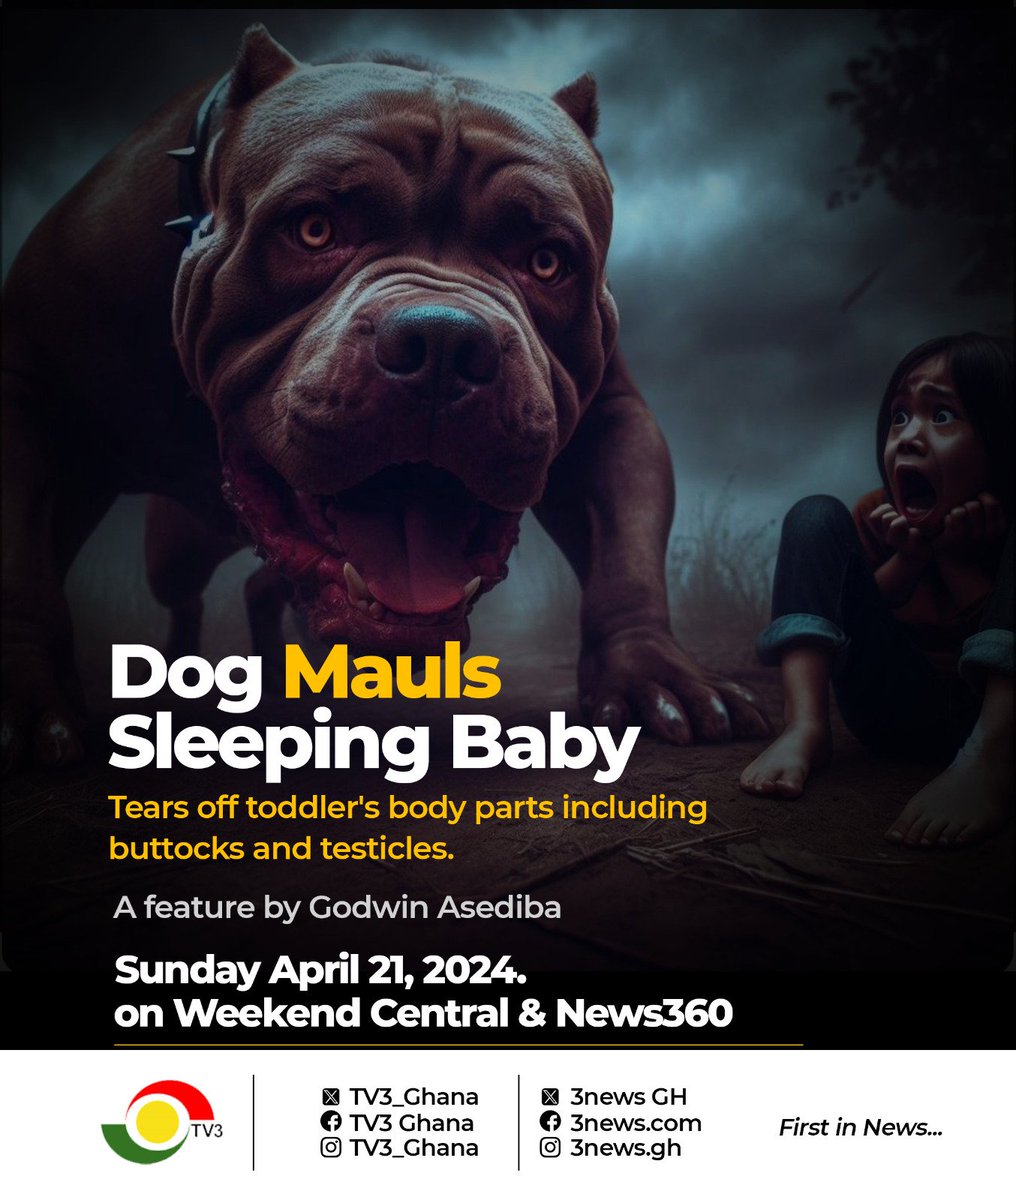 Today on #WeekendCentral at 12pm and #News360 at 7pm, we bring you a feature by @GodwinAsediba on a dog that tore off toddler's body parts. 

#3NewsGH